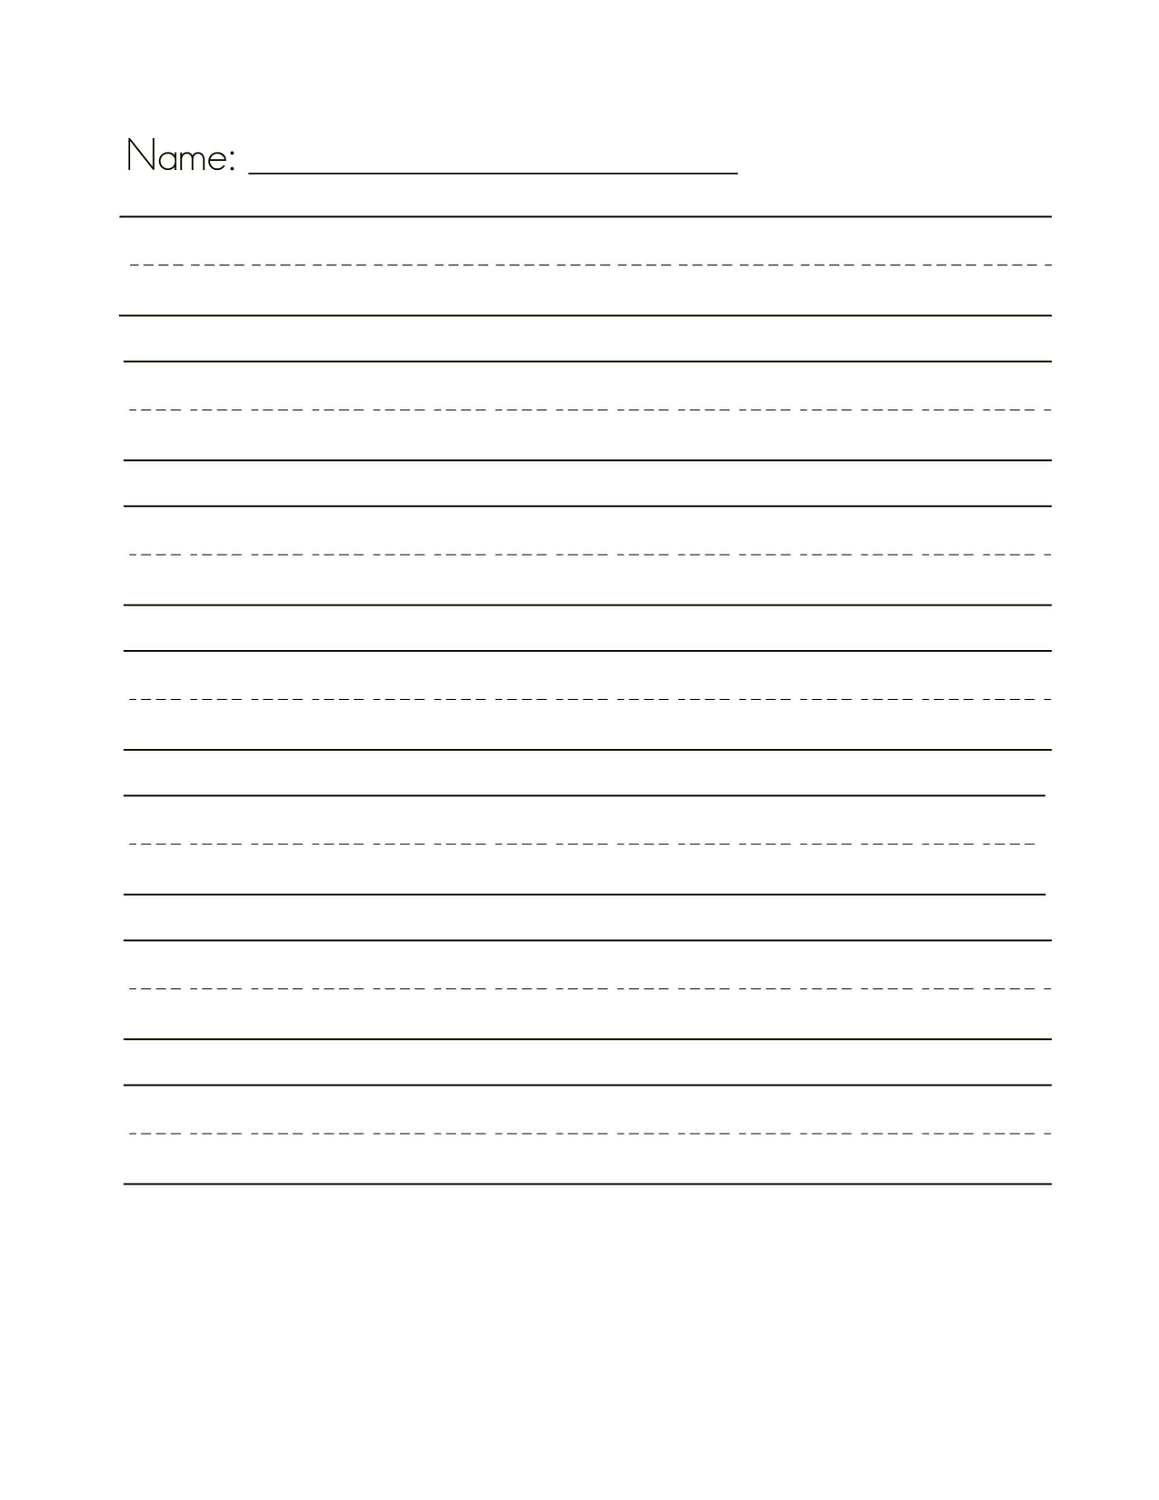 handwriting-lined-paper-printable